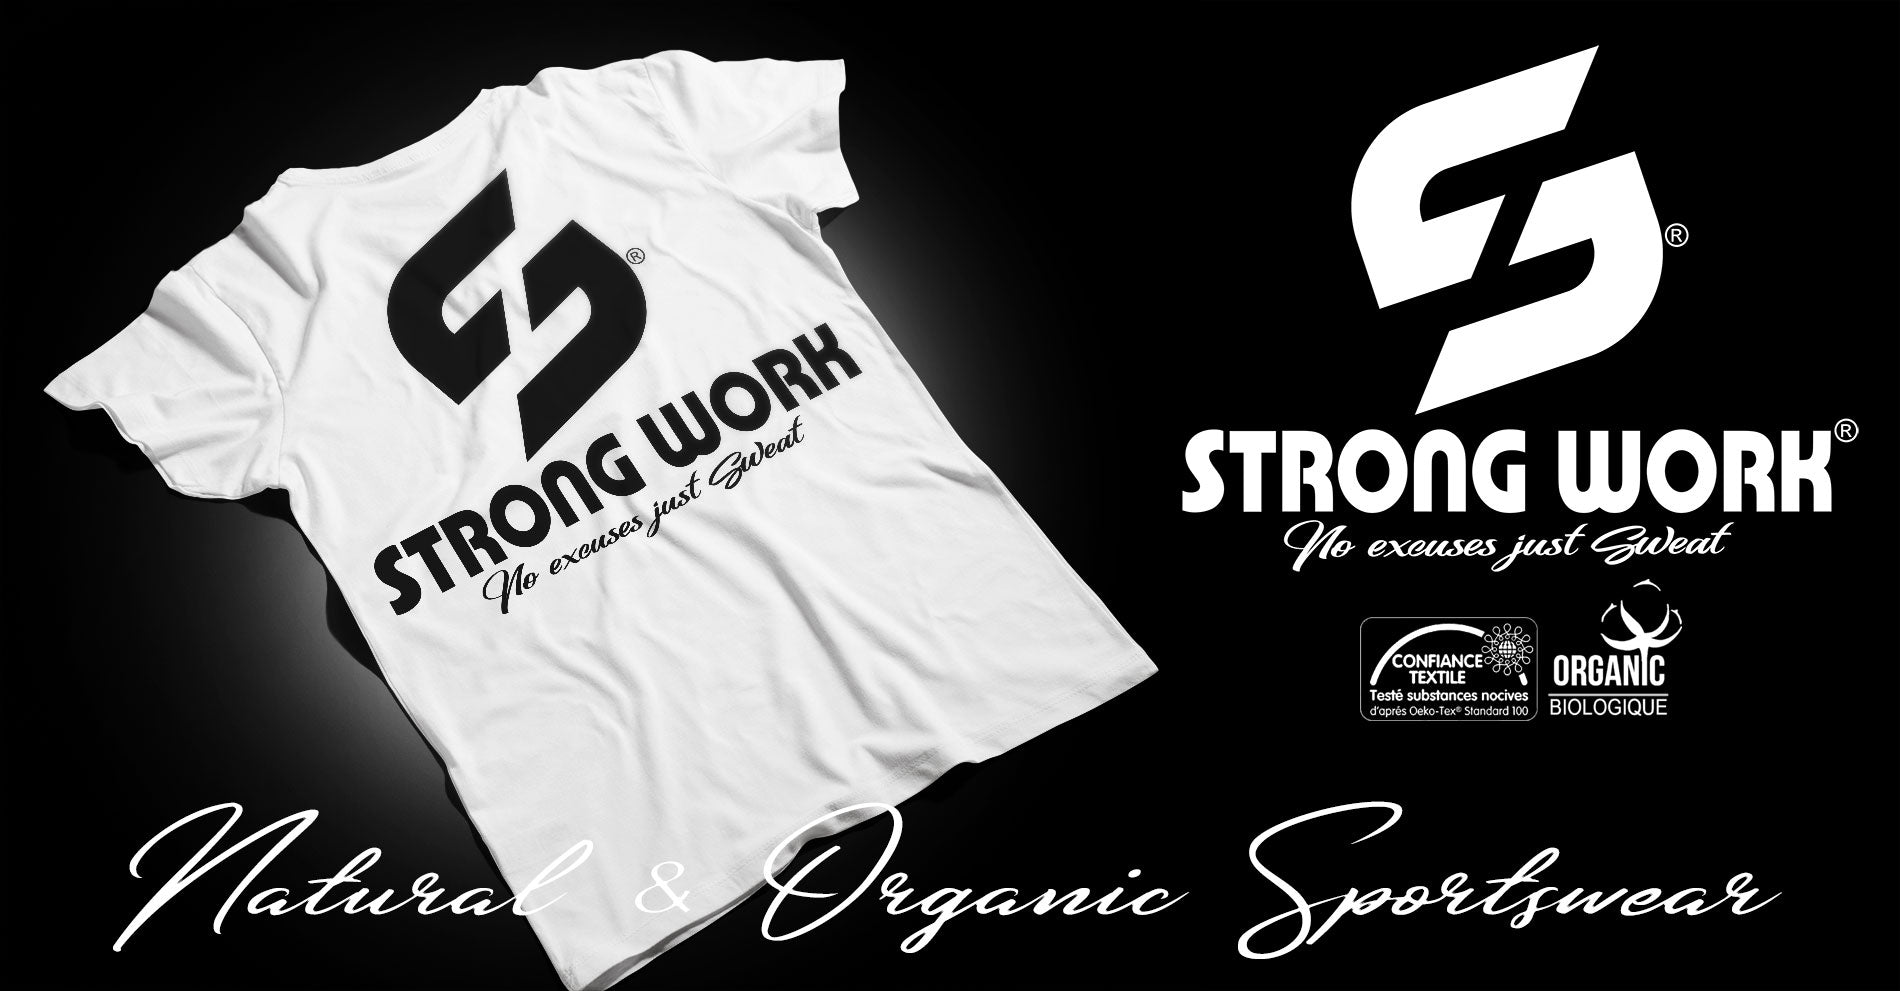 STRONG WORK - SUSTAINABLE SPORTSWEAR